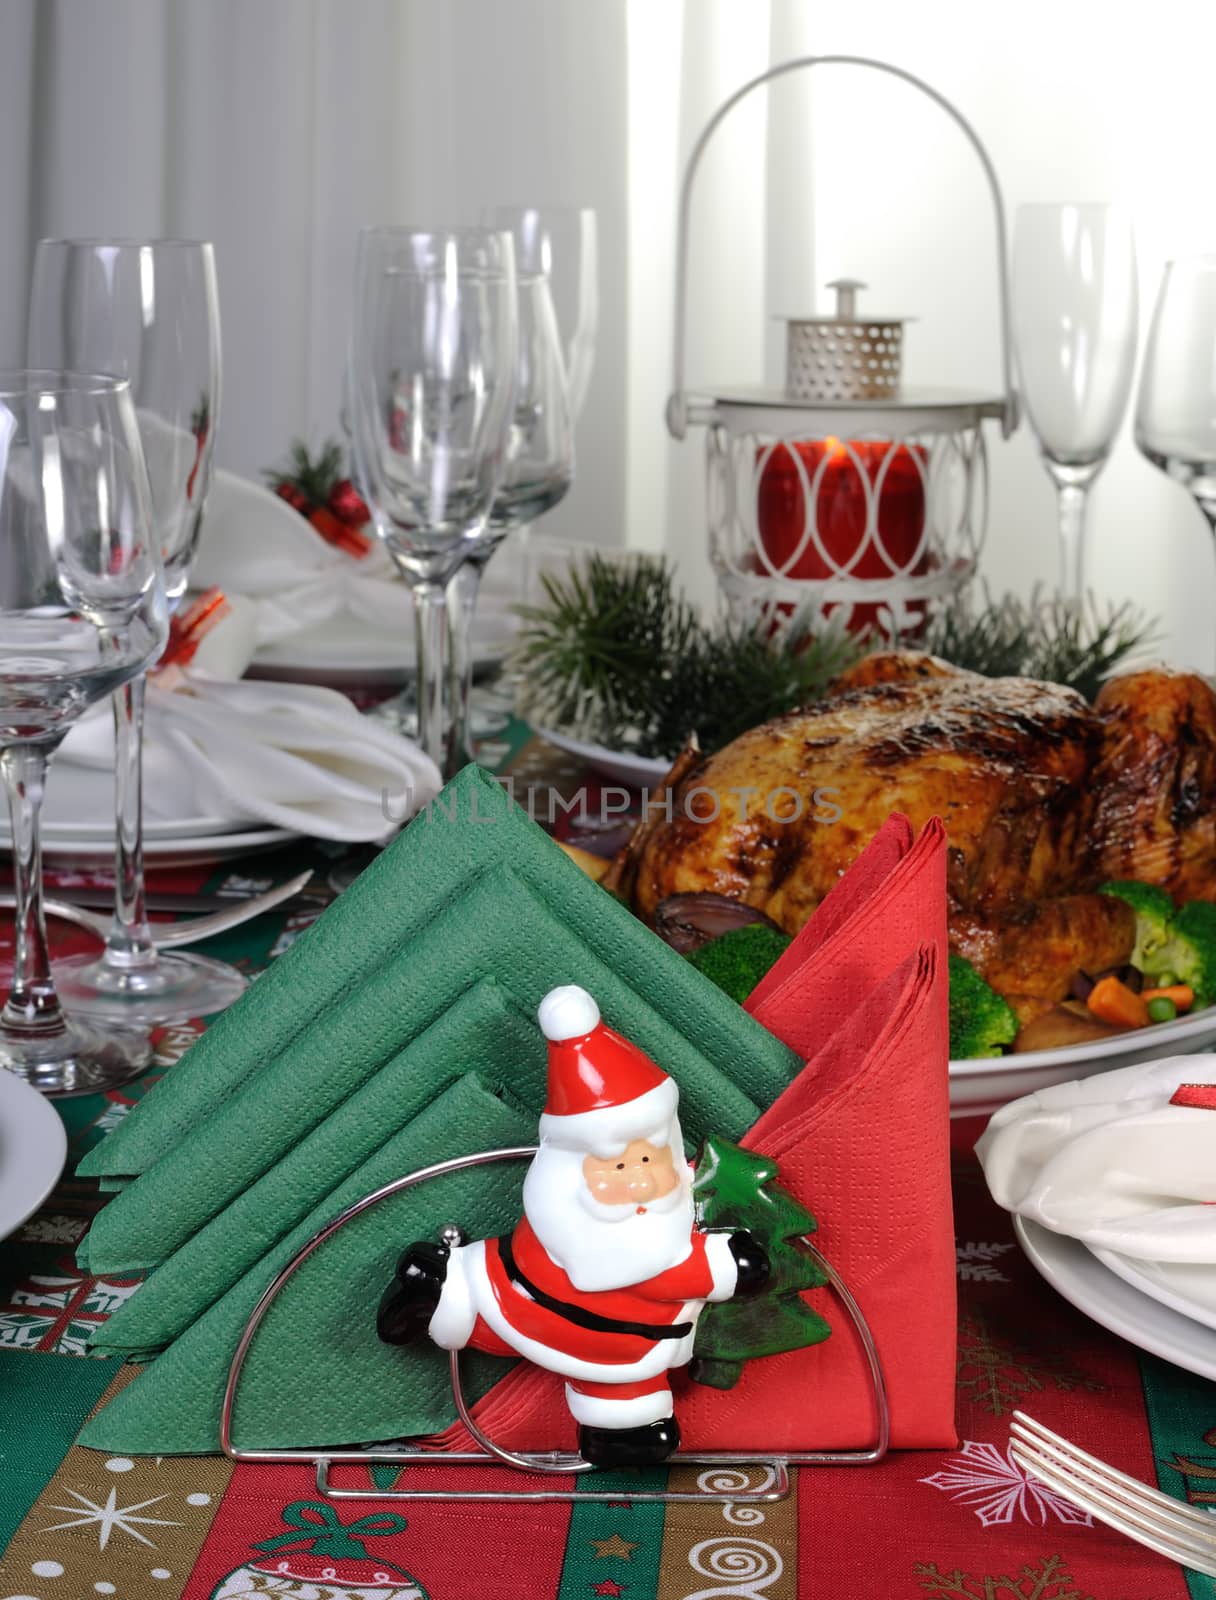 Paper napkins serving as an element of the Christmas table